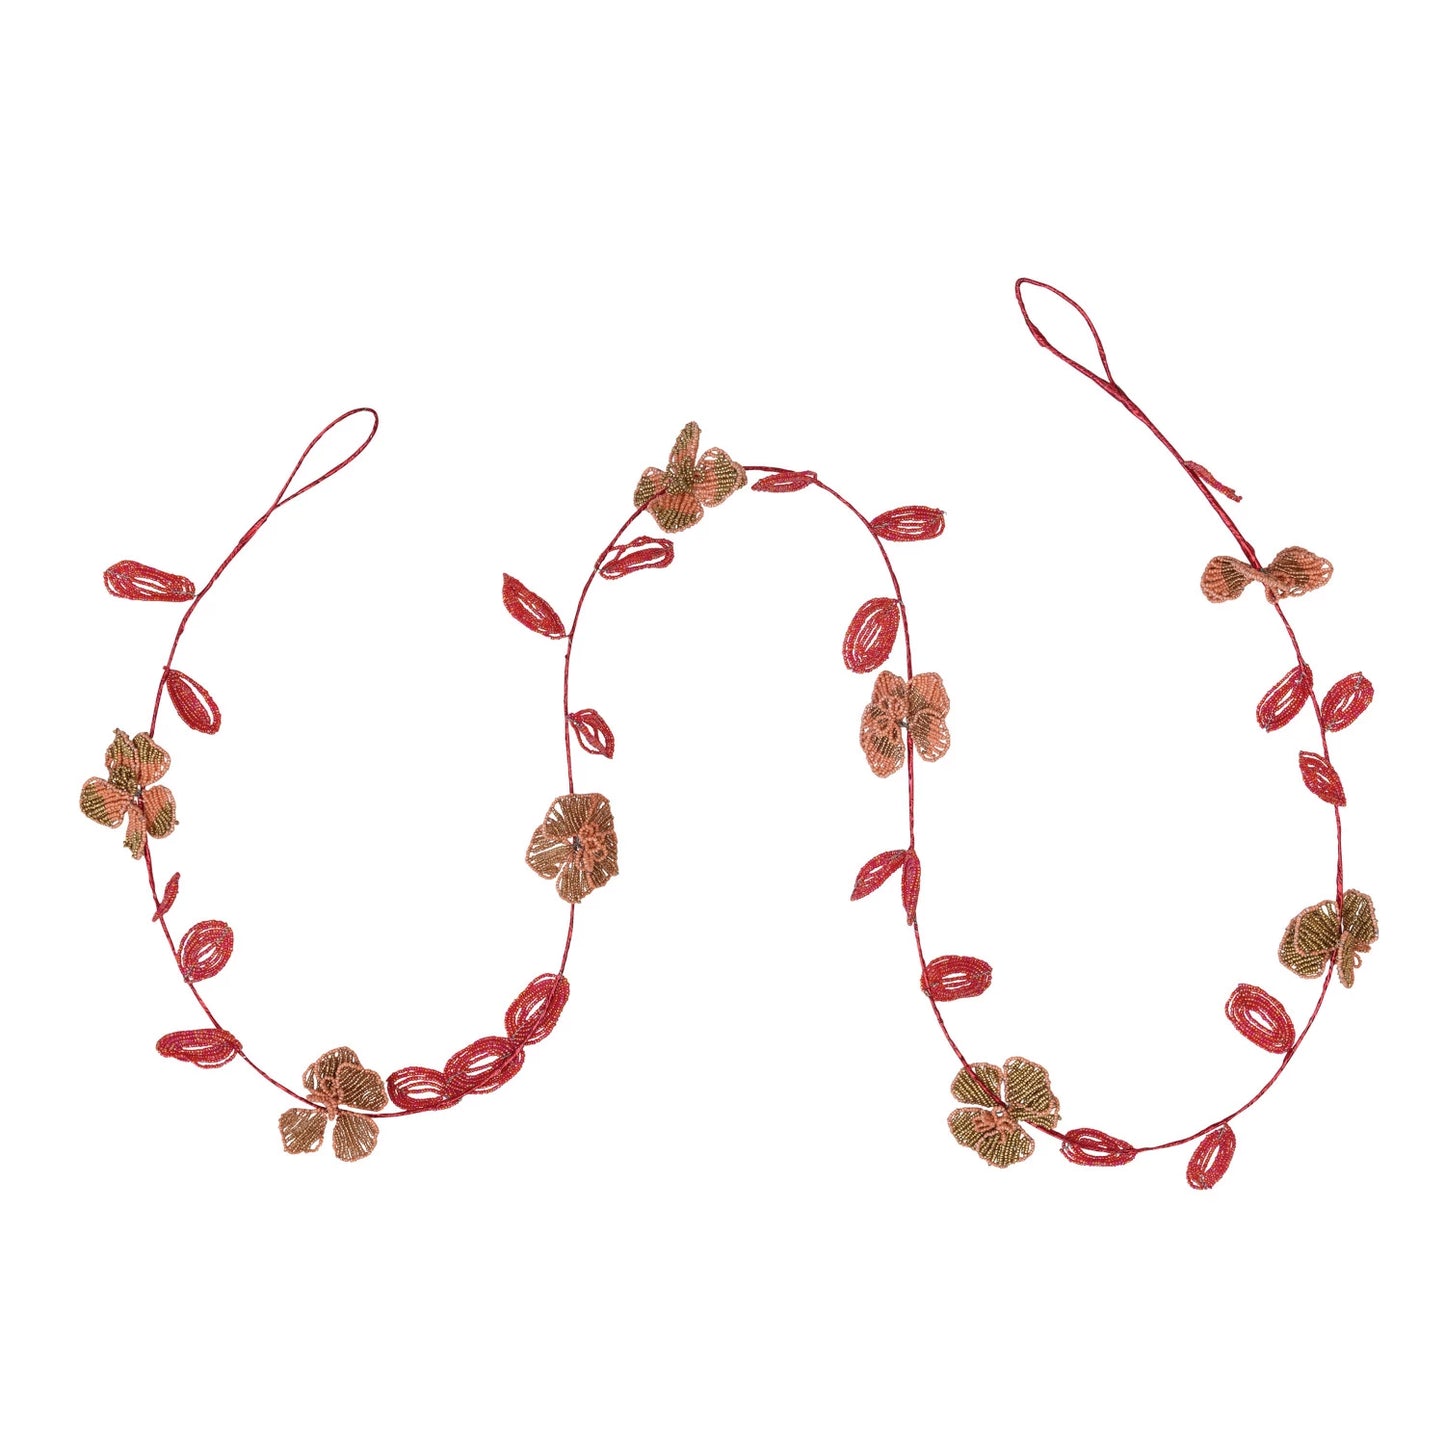 Glass Bead Wired Leaves & Flowers Garland - 72"